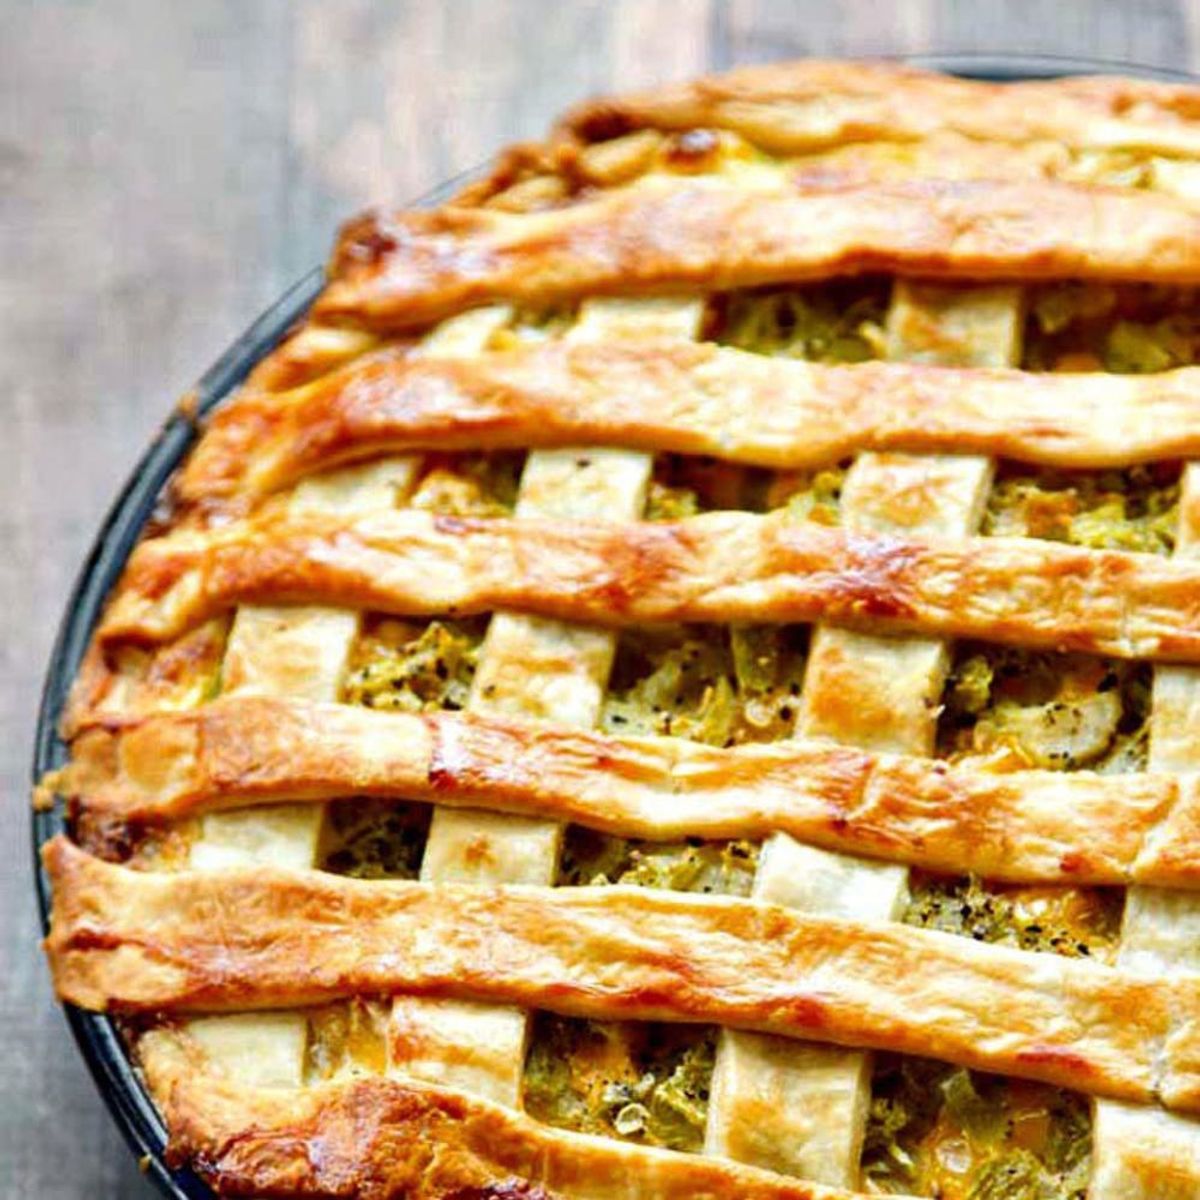 Savory Pies like this lattice vegetable pot pie are just one of 12 ideas to replace your next dessert